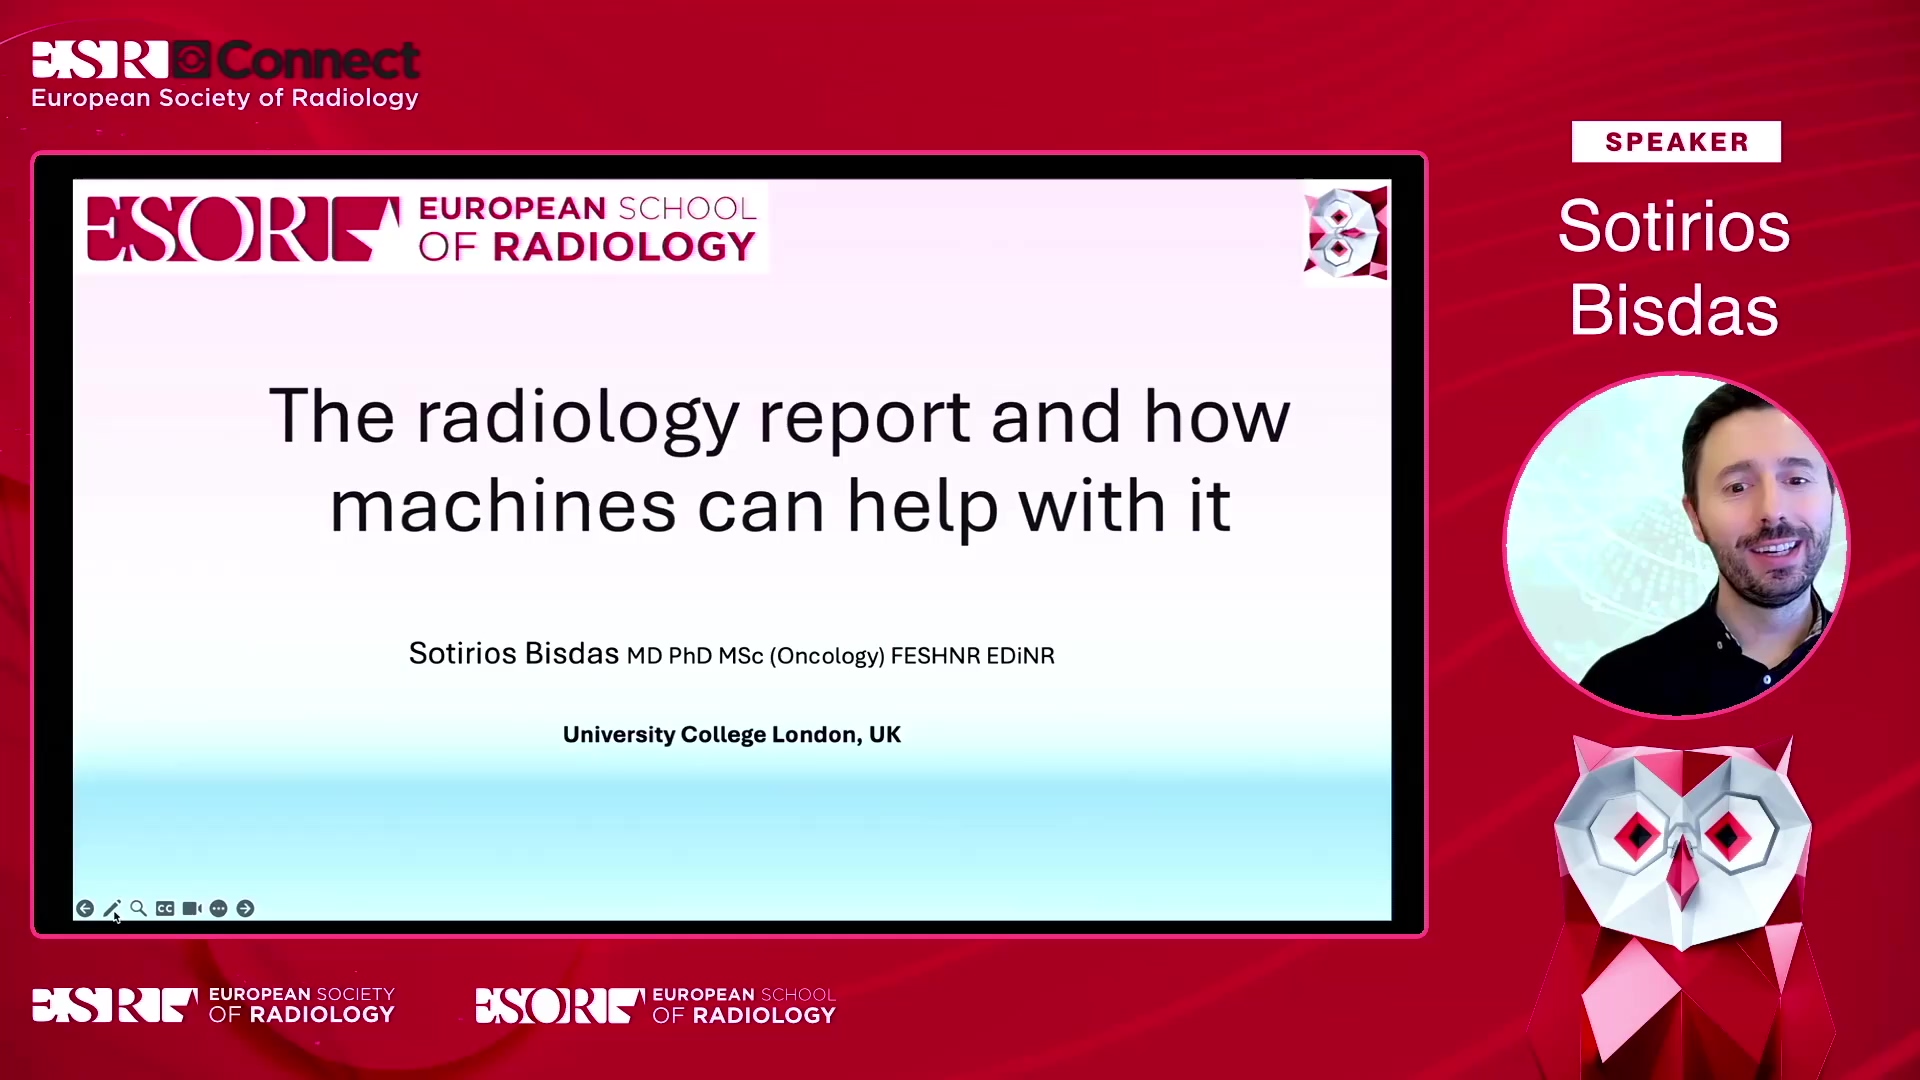 The radiology report and how machines can help with it